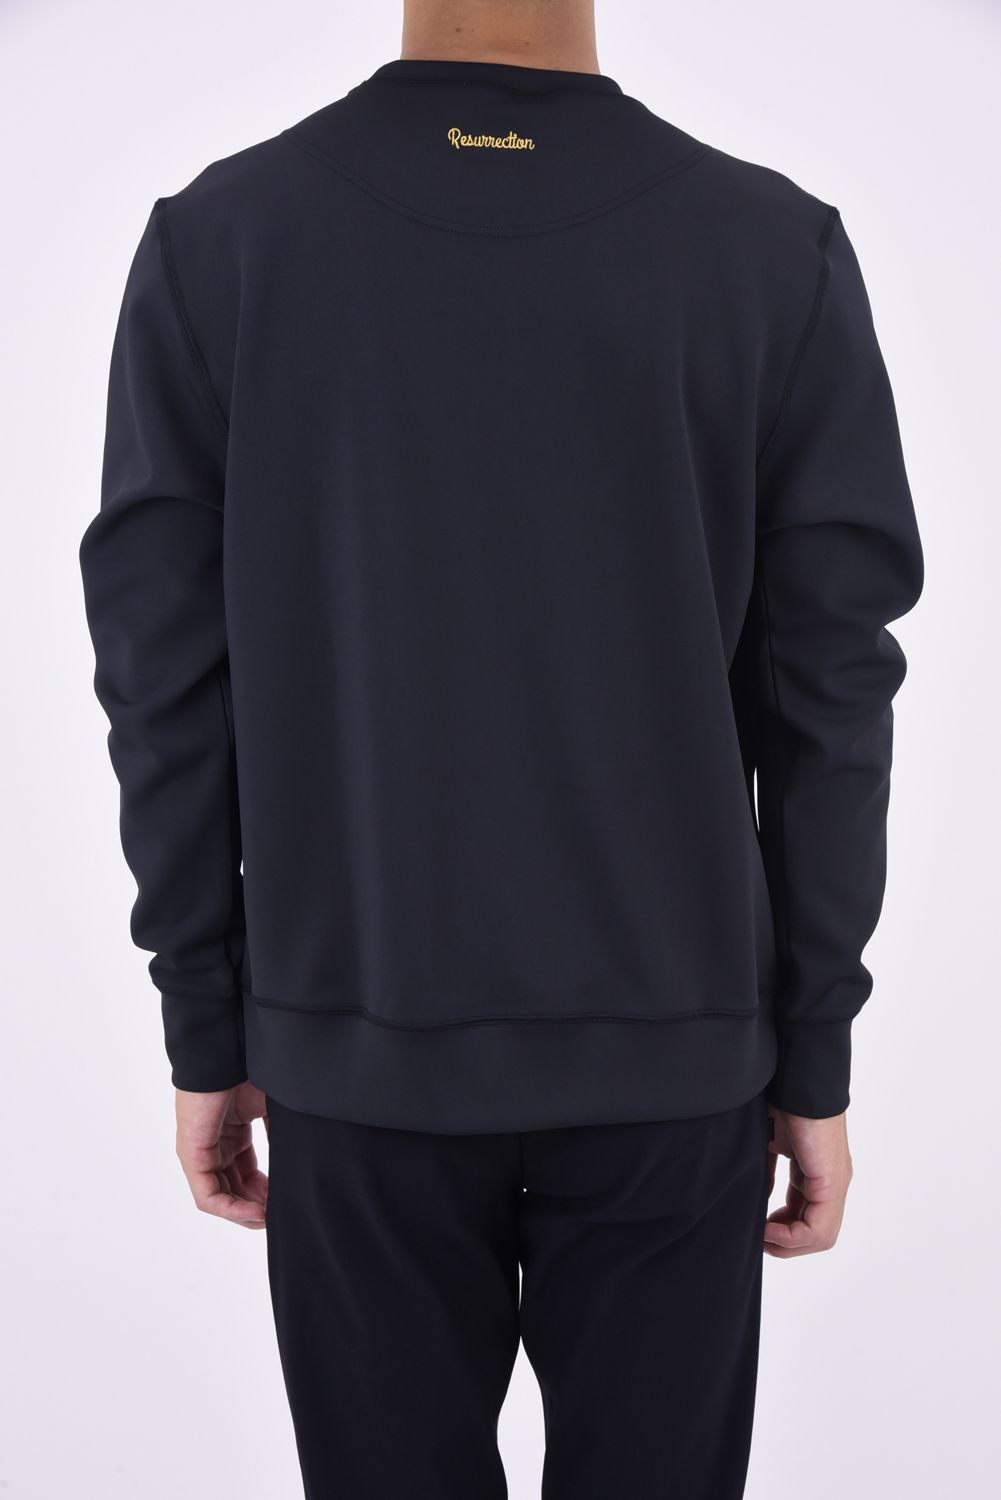 Resurrection - MENS ACTIVE CREW NECK PULLOVER / アクティブクルー